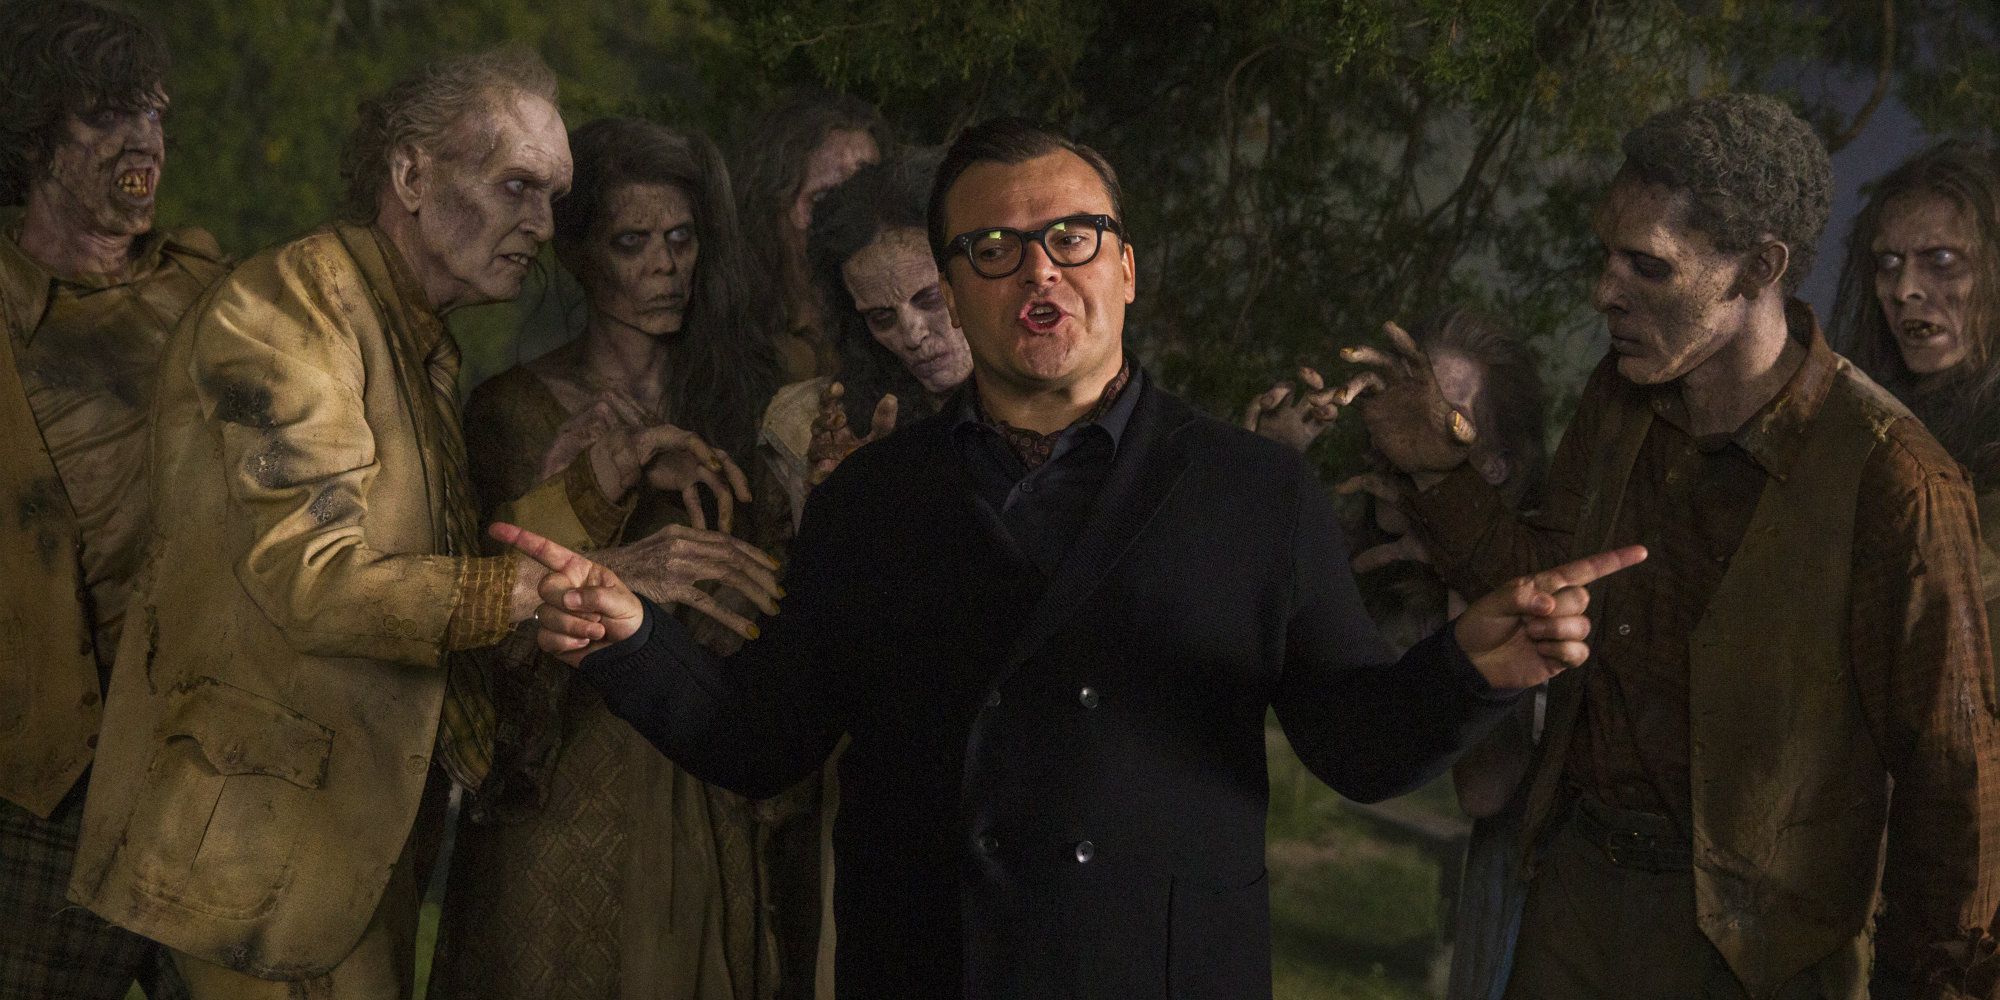 Jack Black as R.L. Stine surrounded by zombies in Goosebumps - 